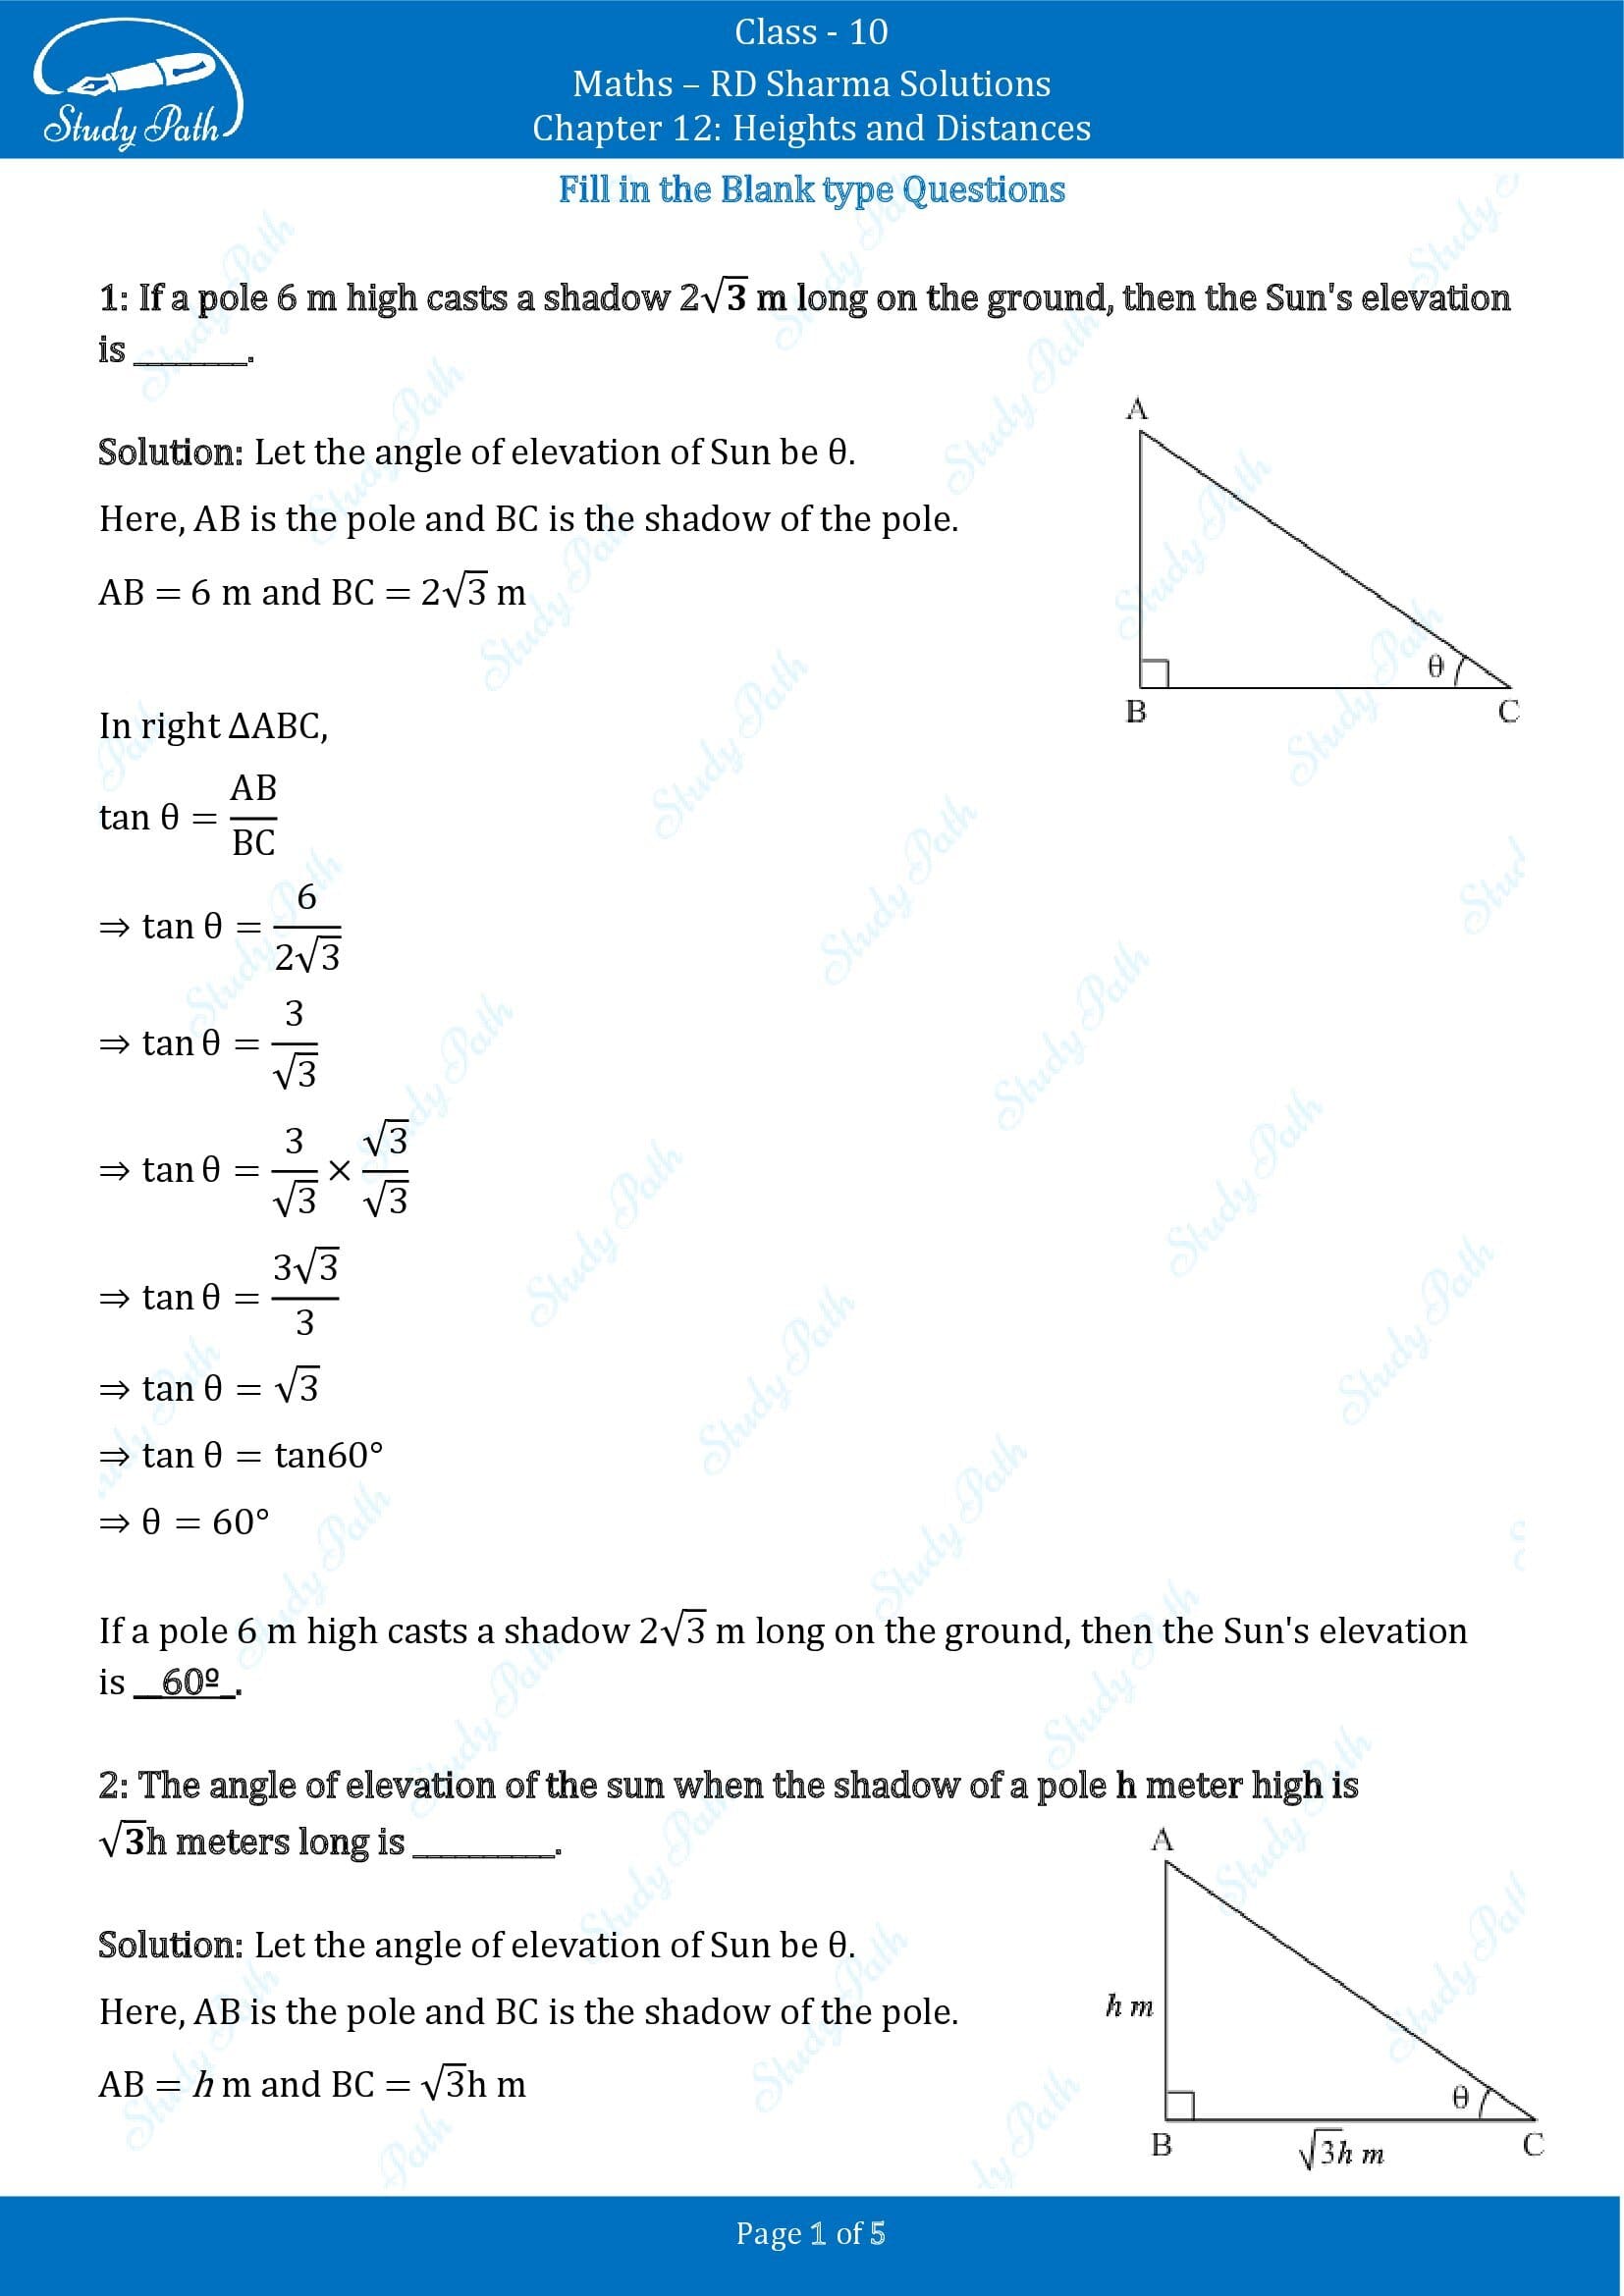 RD Sharma Solutions Class 10 Chapter 12 Heights and Distances Fill in the Blank Type Questions FBQs 00001